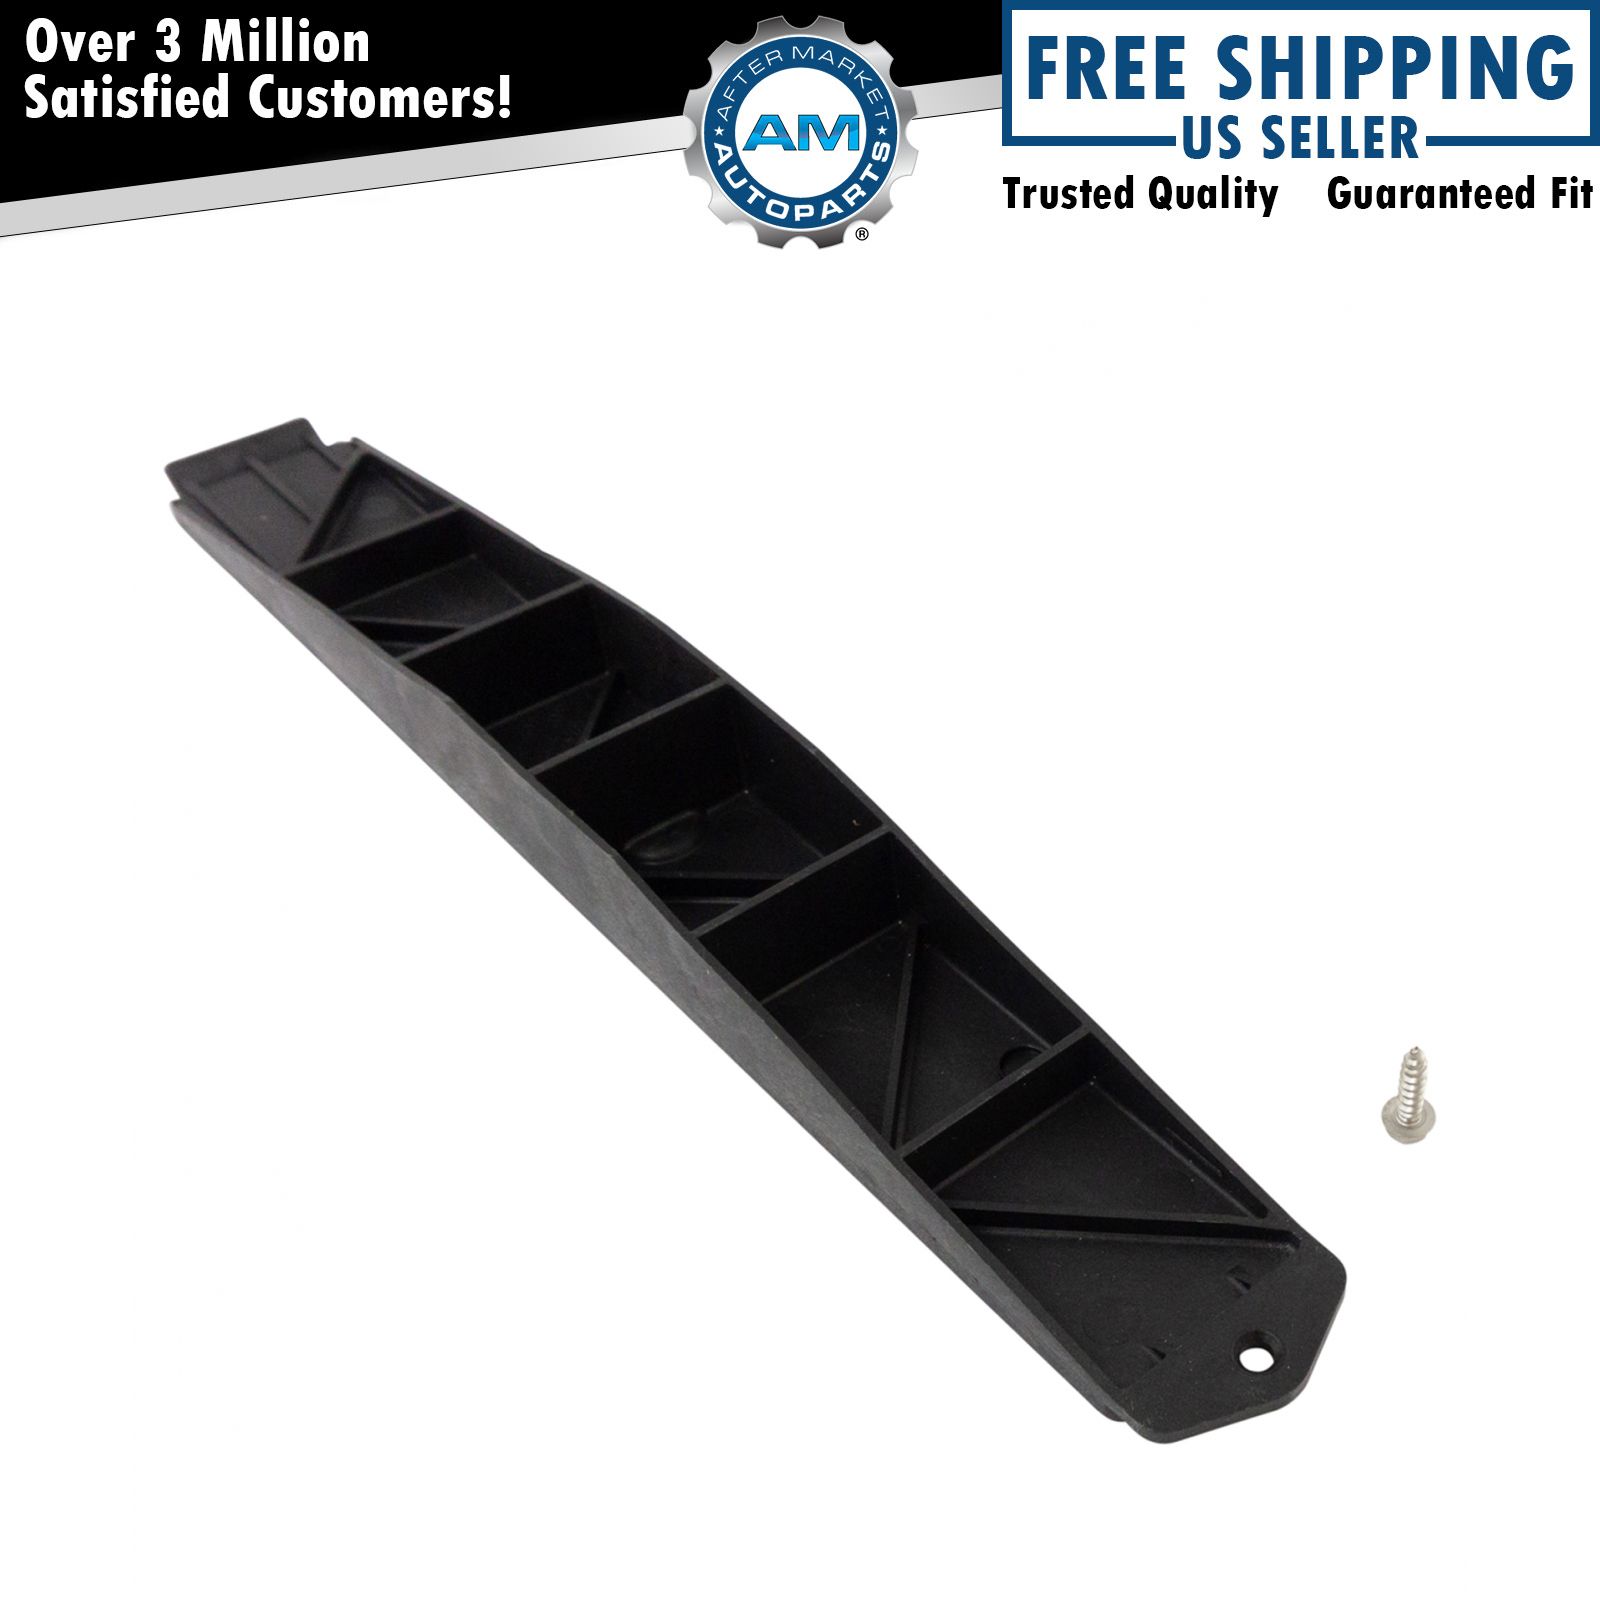 Dorman 259-100 Cabin Air Filter Cover Lid Plate for GM Pickup Truck SUV New